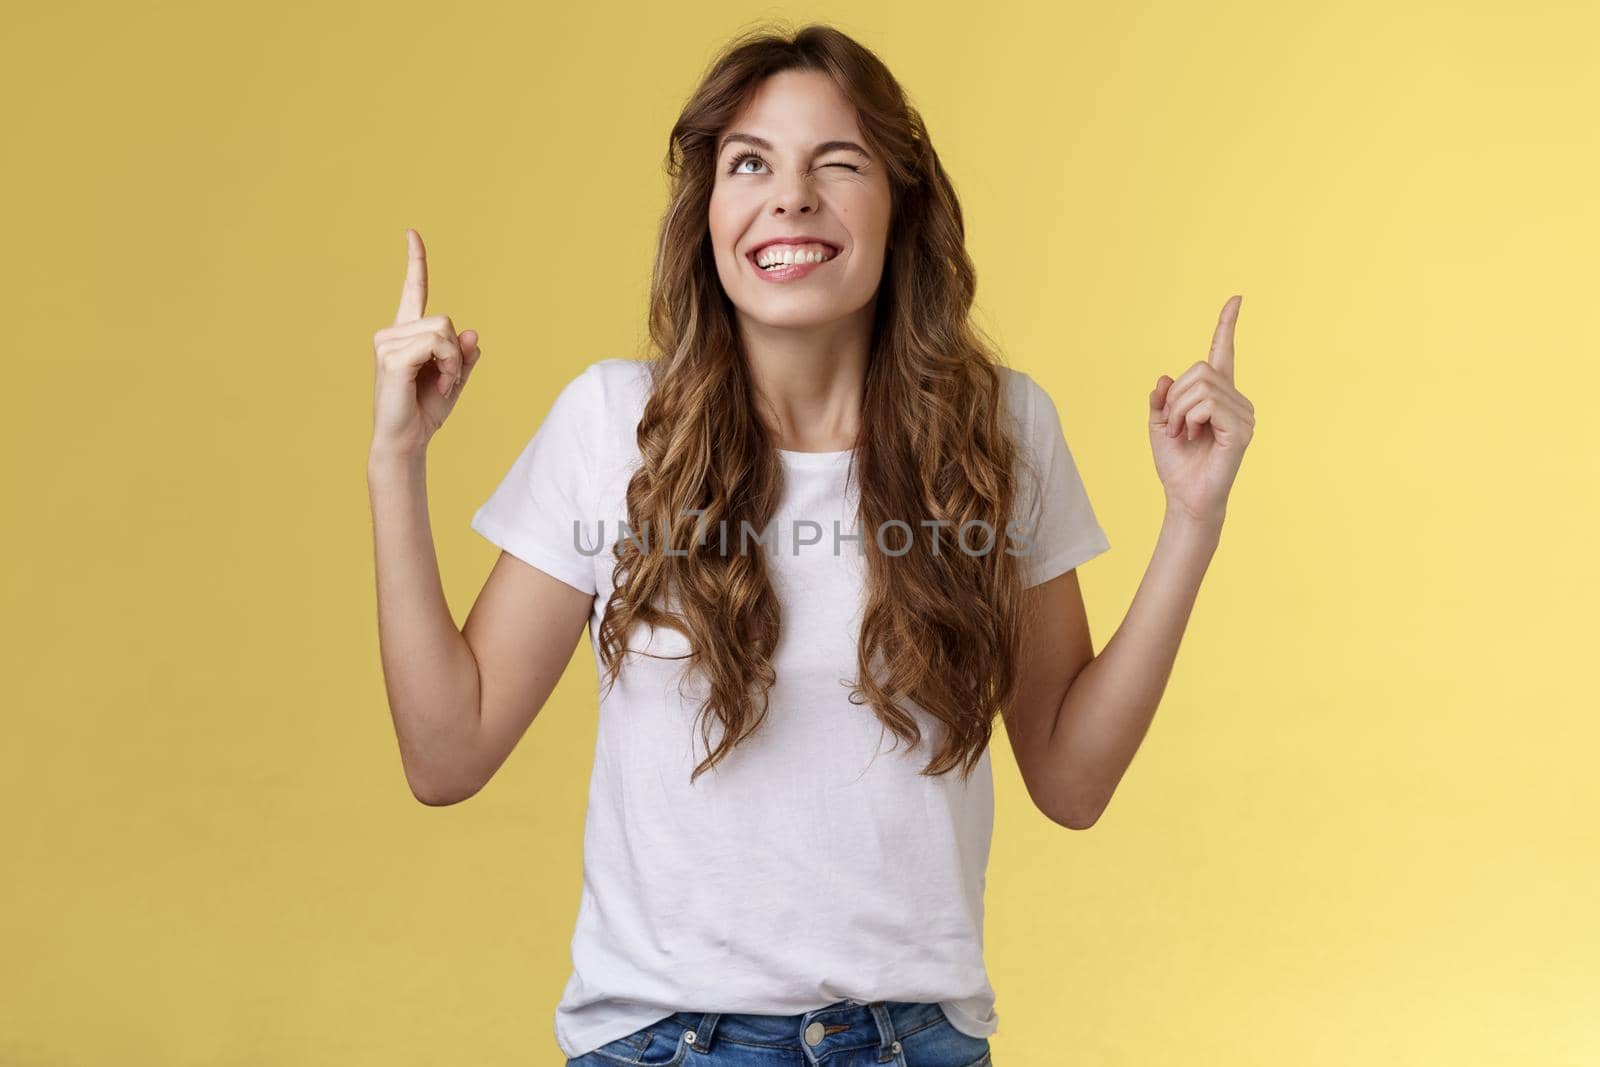 Cheeky confident positive attractive female optimistic joyful vibe smiling toothy wink grinning look up sassy pointing top making deal god hinting making cunning mood stand yellow background. Lifestyle.